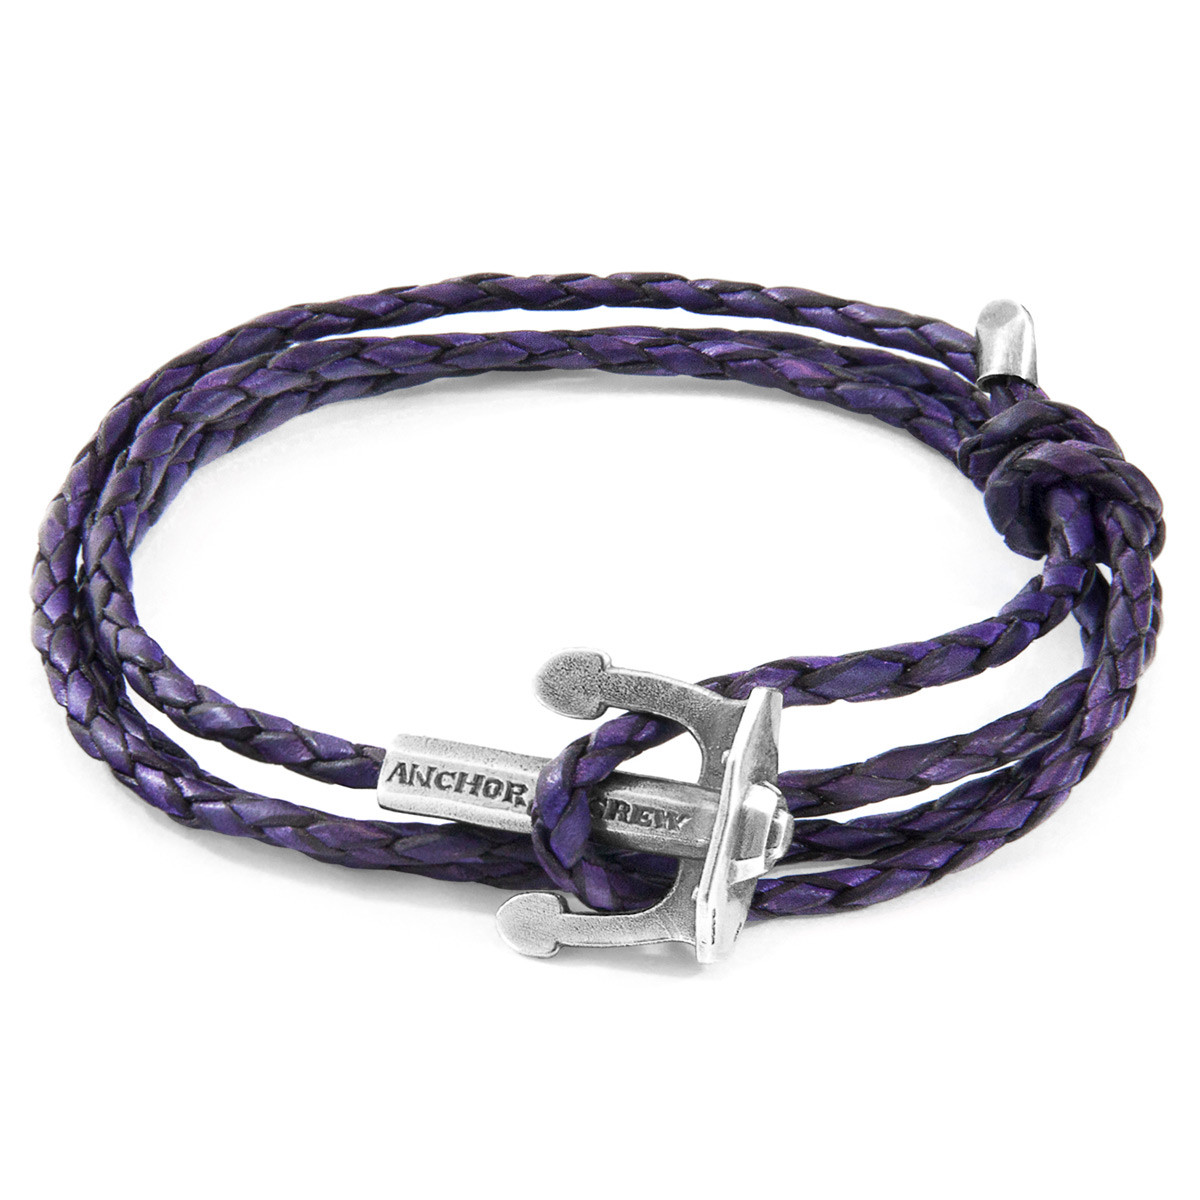 Anchor & Crew Grape Purple Union Anchor Silver and Braided Leather Bracelet